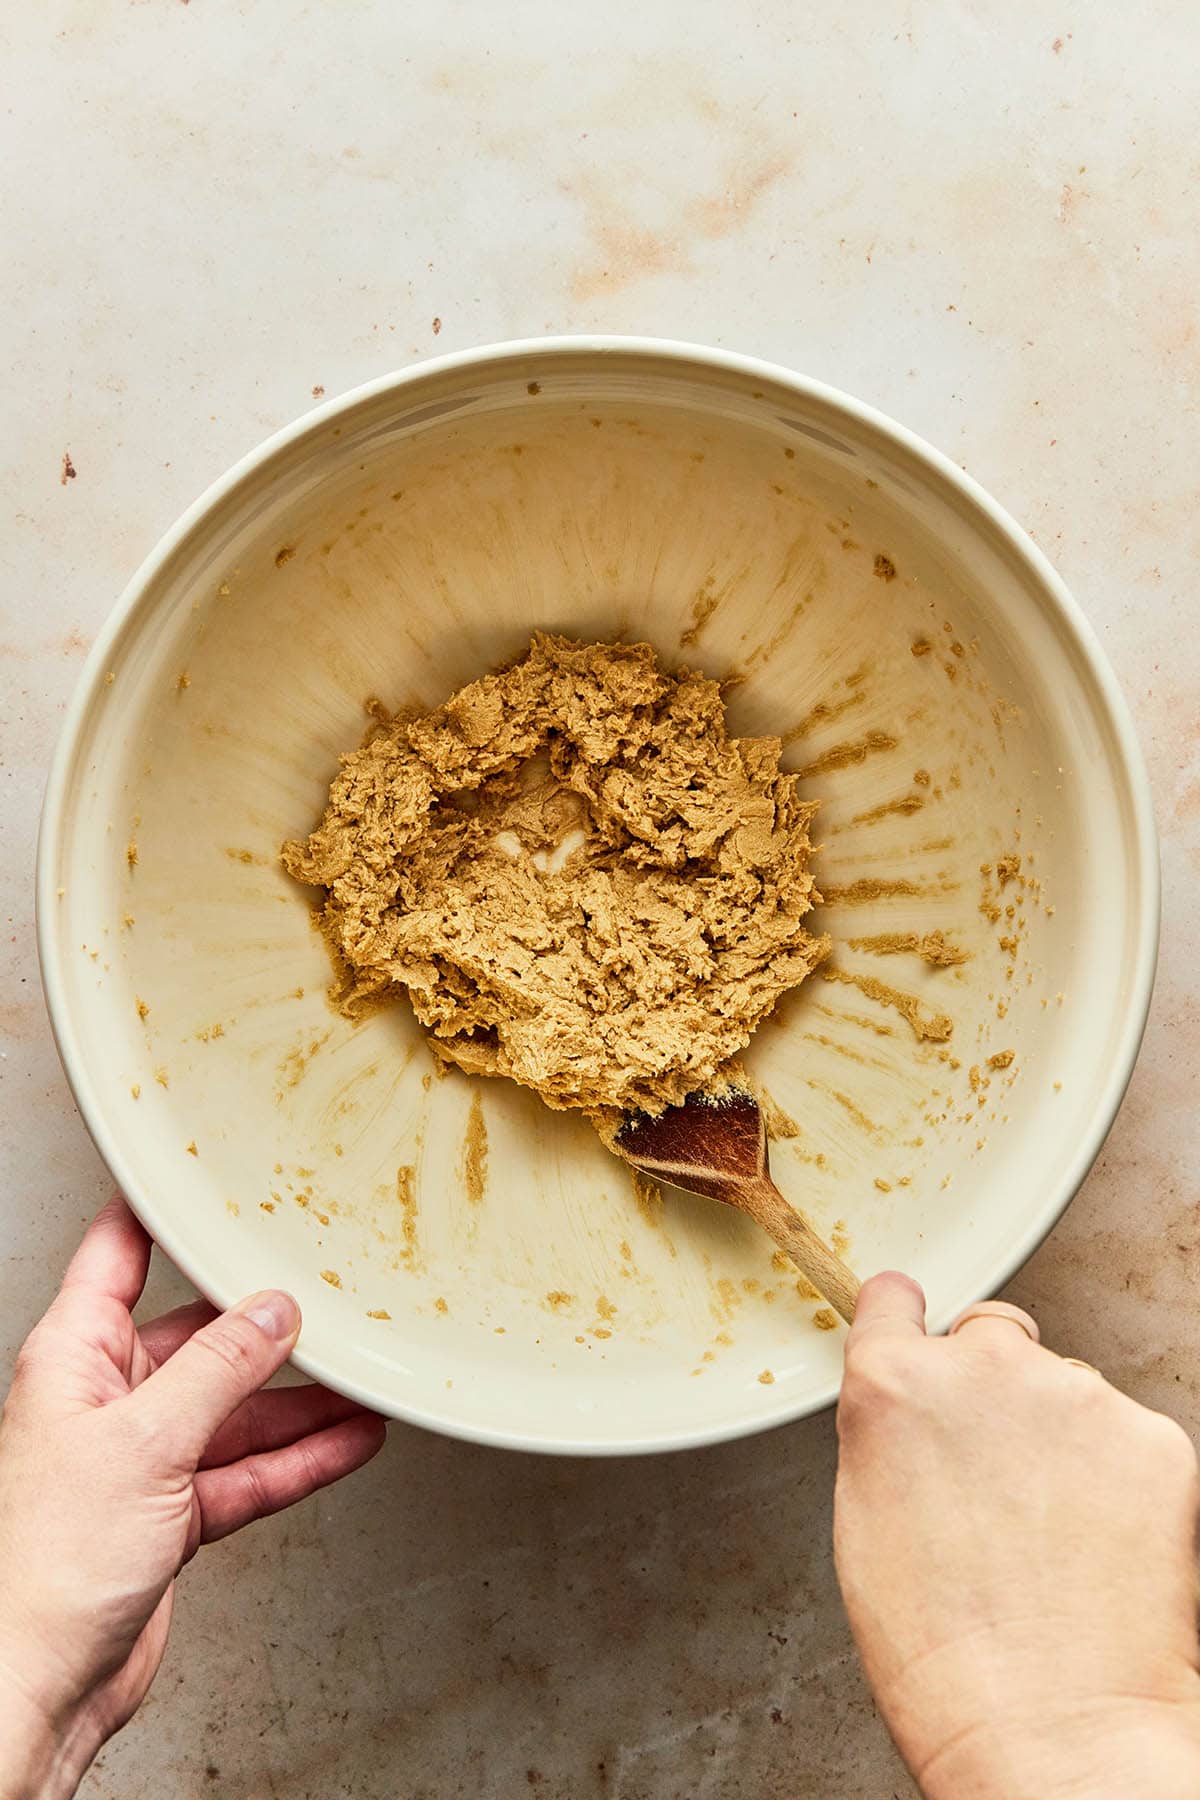 A hand using a wooden spoon to scrape down the sides of a mixing bowl.